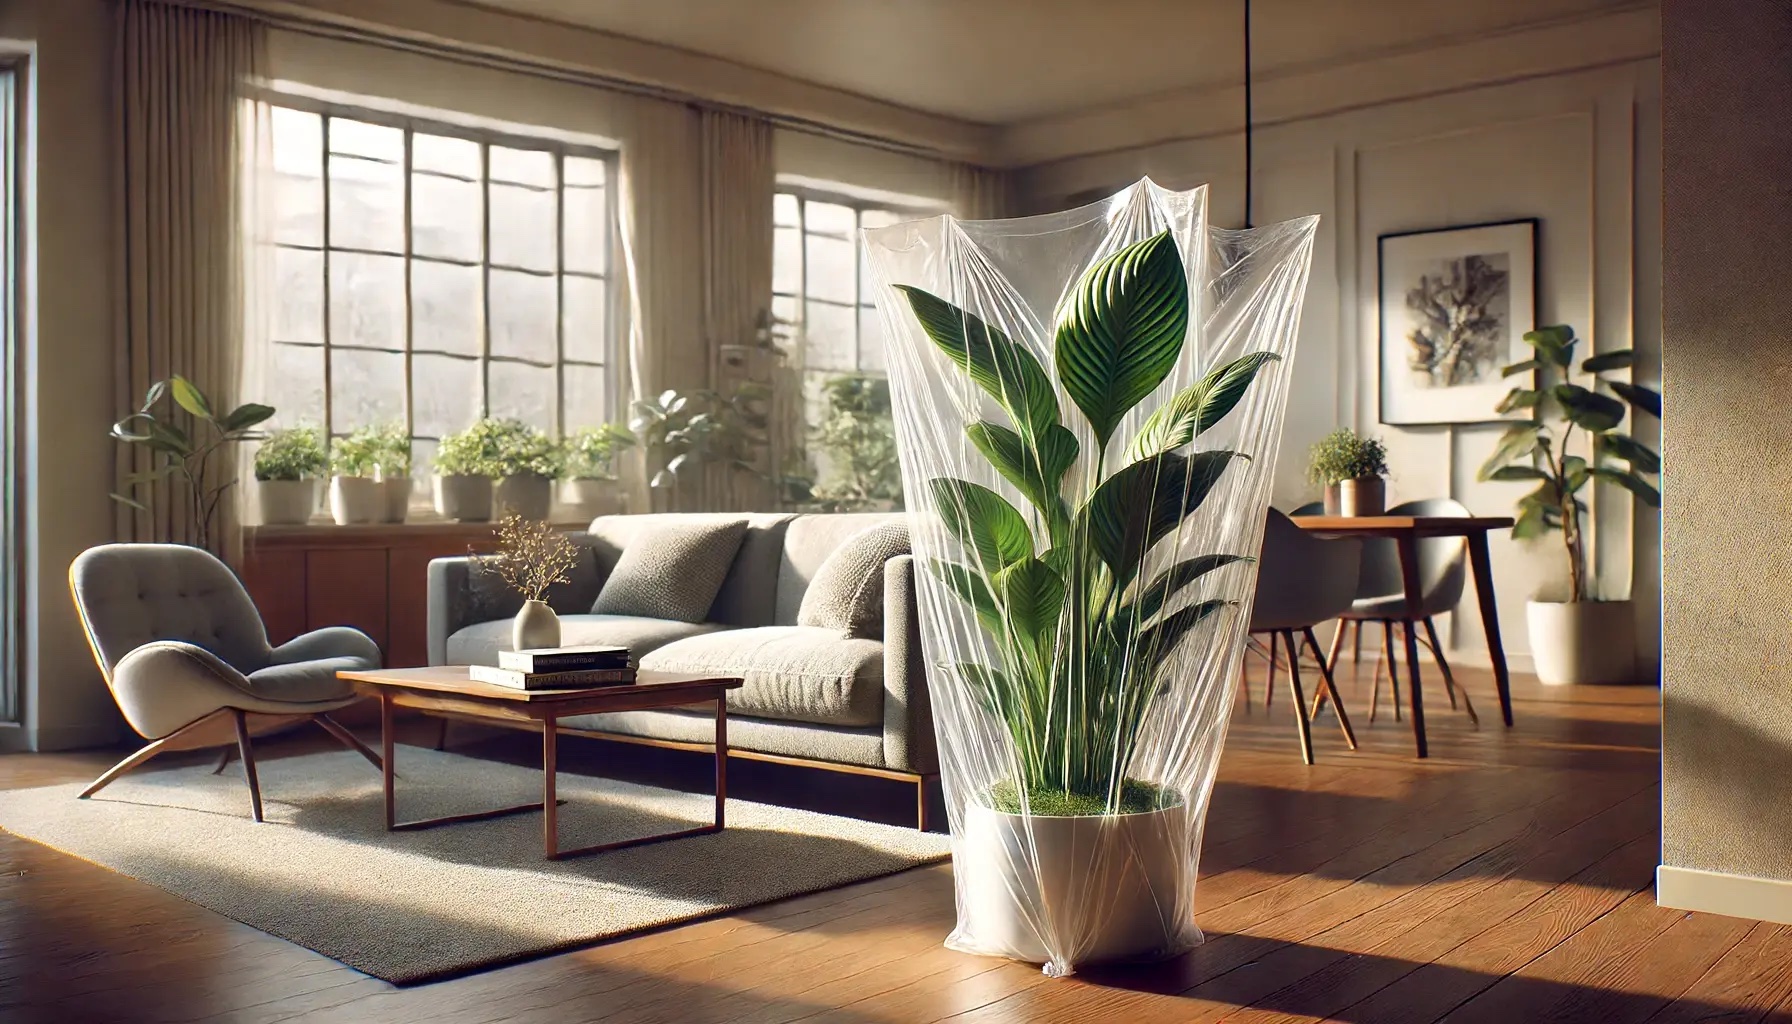 dall e 2024-06-18 22.35.52 - a photorealistic scene of a tokyo winter afternoon in an apartment living room. a spathiphyllum sapling is prominently featured with its leaves and s